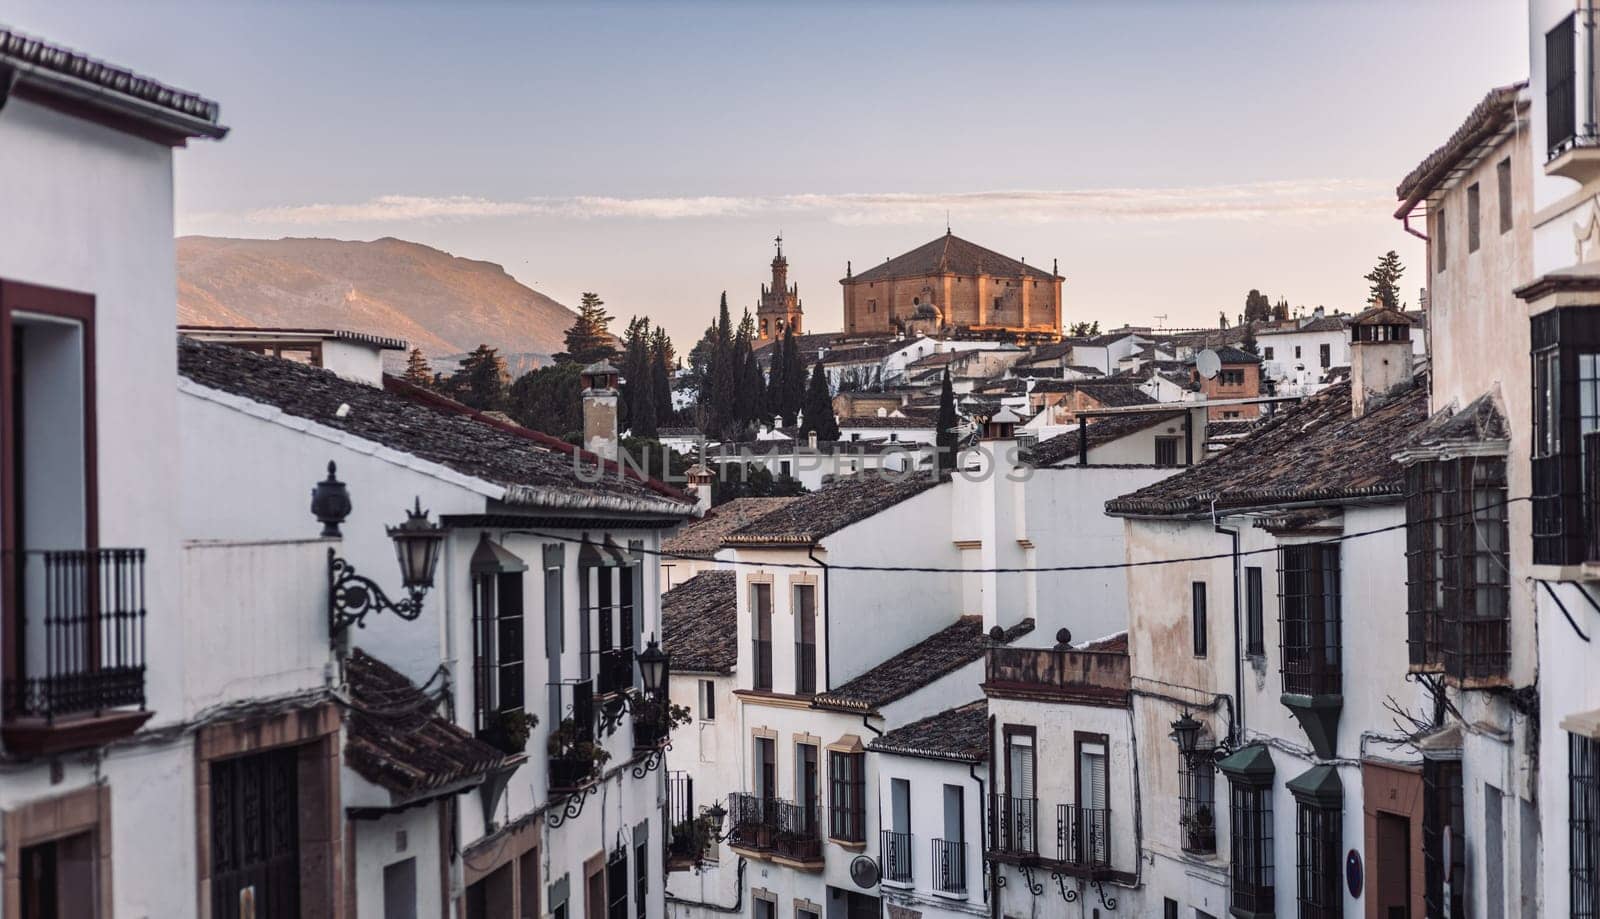 Views of the medieval village of Ronda with white Andalusian houses and the gothic style church of Santuario de Maria Auxiliadora. Malaga, Spain. by kasto